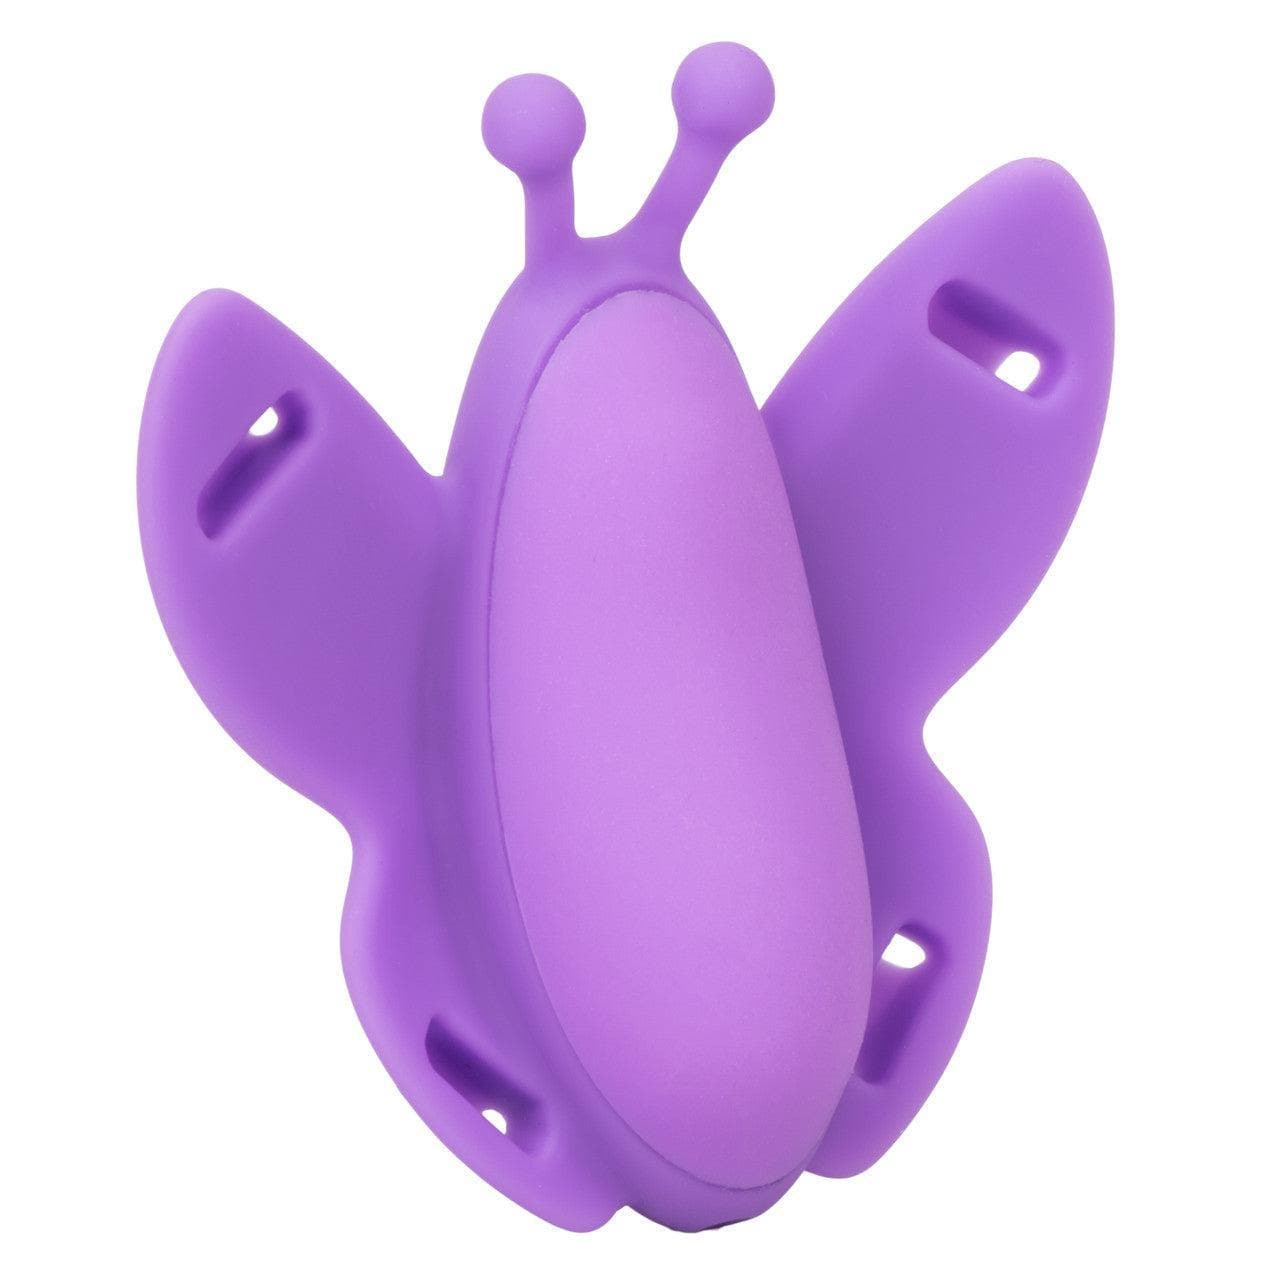 Venus Butterfly Silicone Remote Control Venus USB Rechargeable 10 Function Vibrator - Romantic Blessings